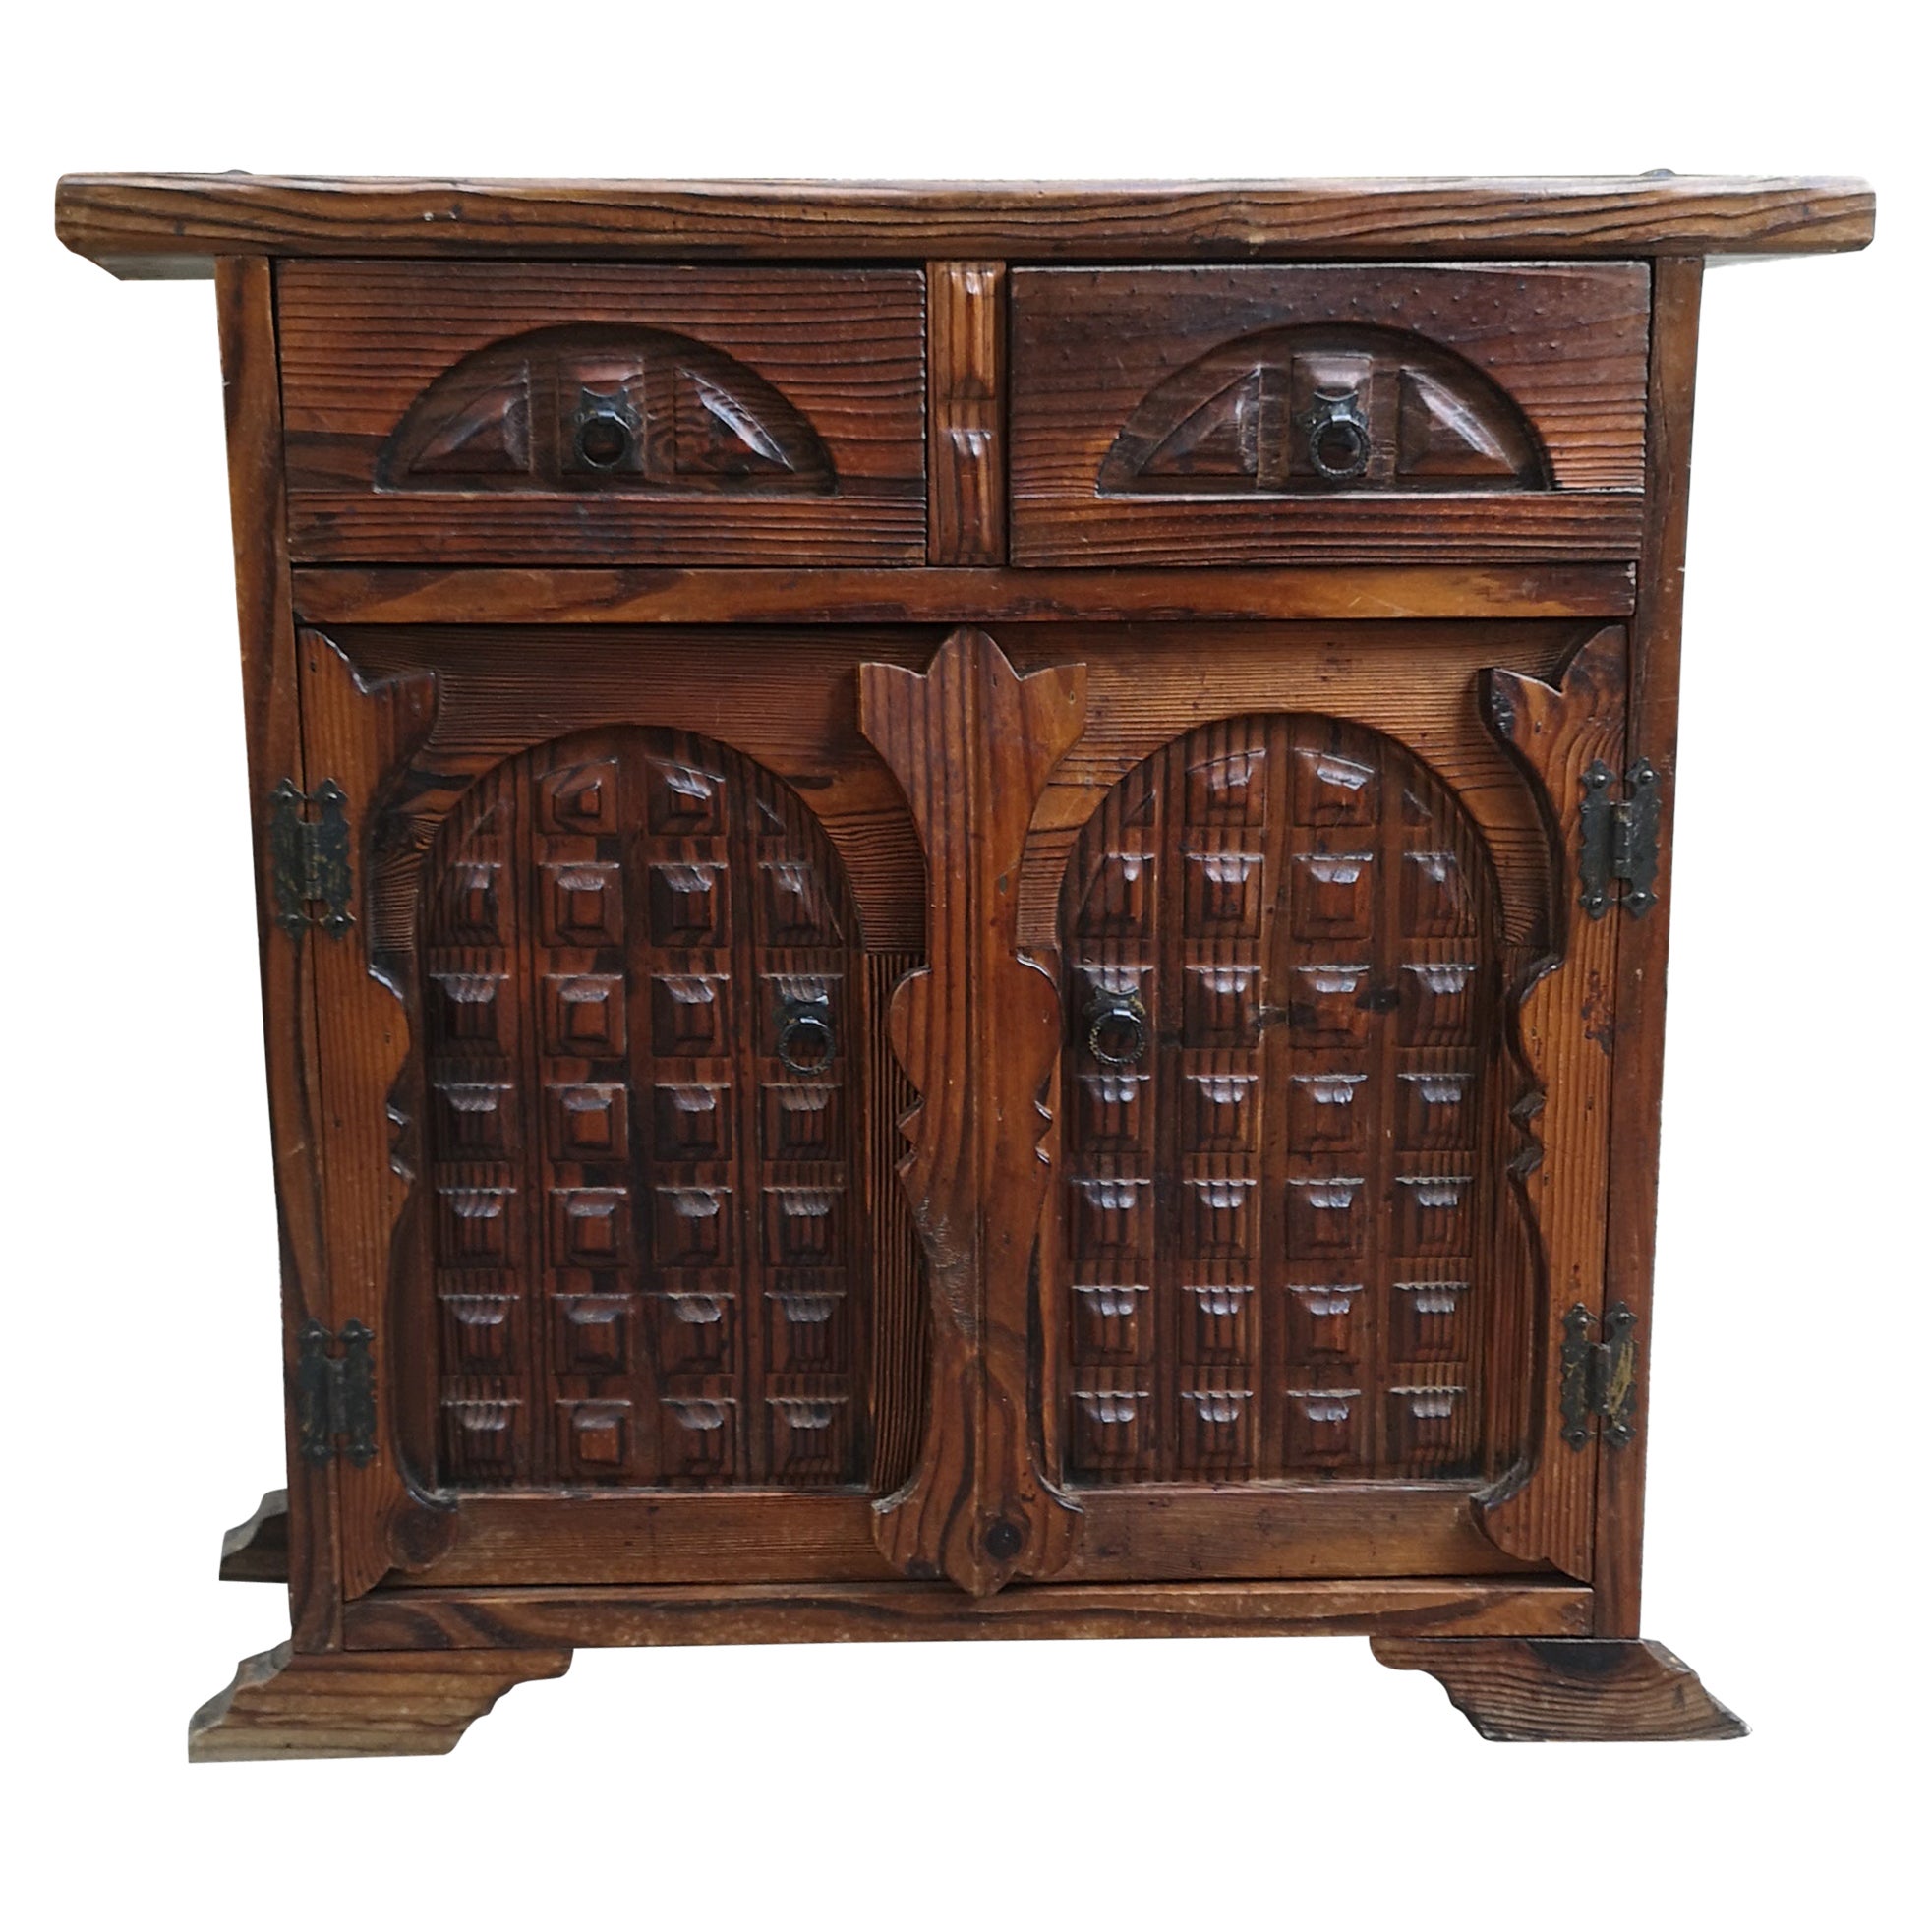 Tuscan Buffet or Cupboard in the Catalan Baroque Style